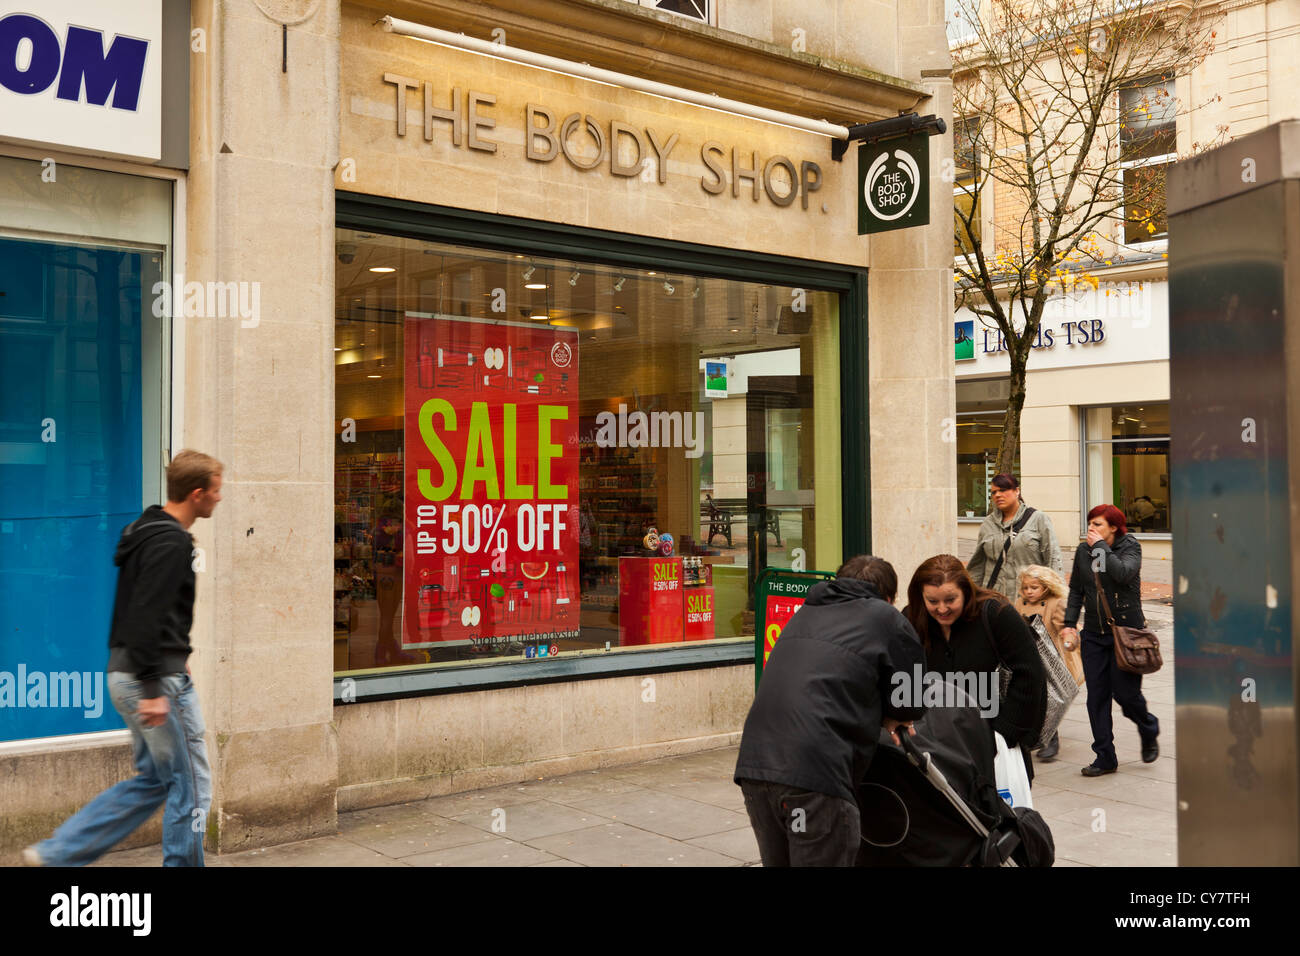 The Body Shop, Commercial Street, Newport, Wales, UK. Stock Photo